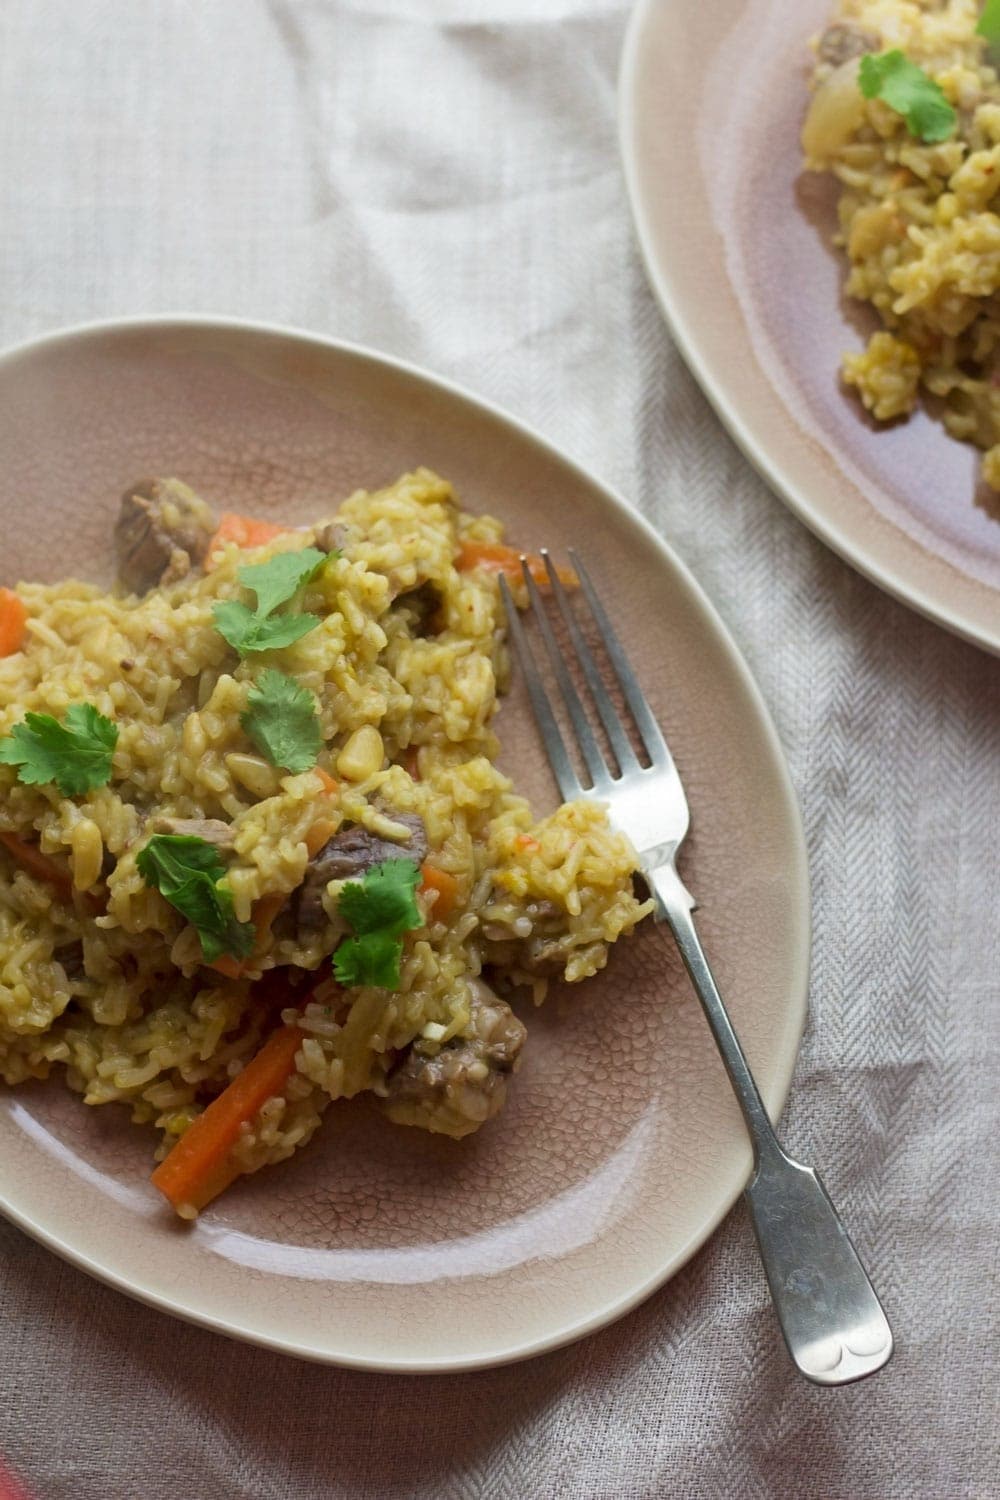 This leftover roast lamb pilaf is a great way to use up leftovers and you could easily substitute the lamb for any other cooked meat!